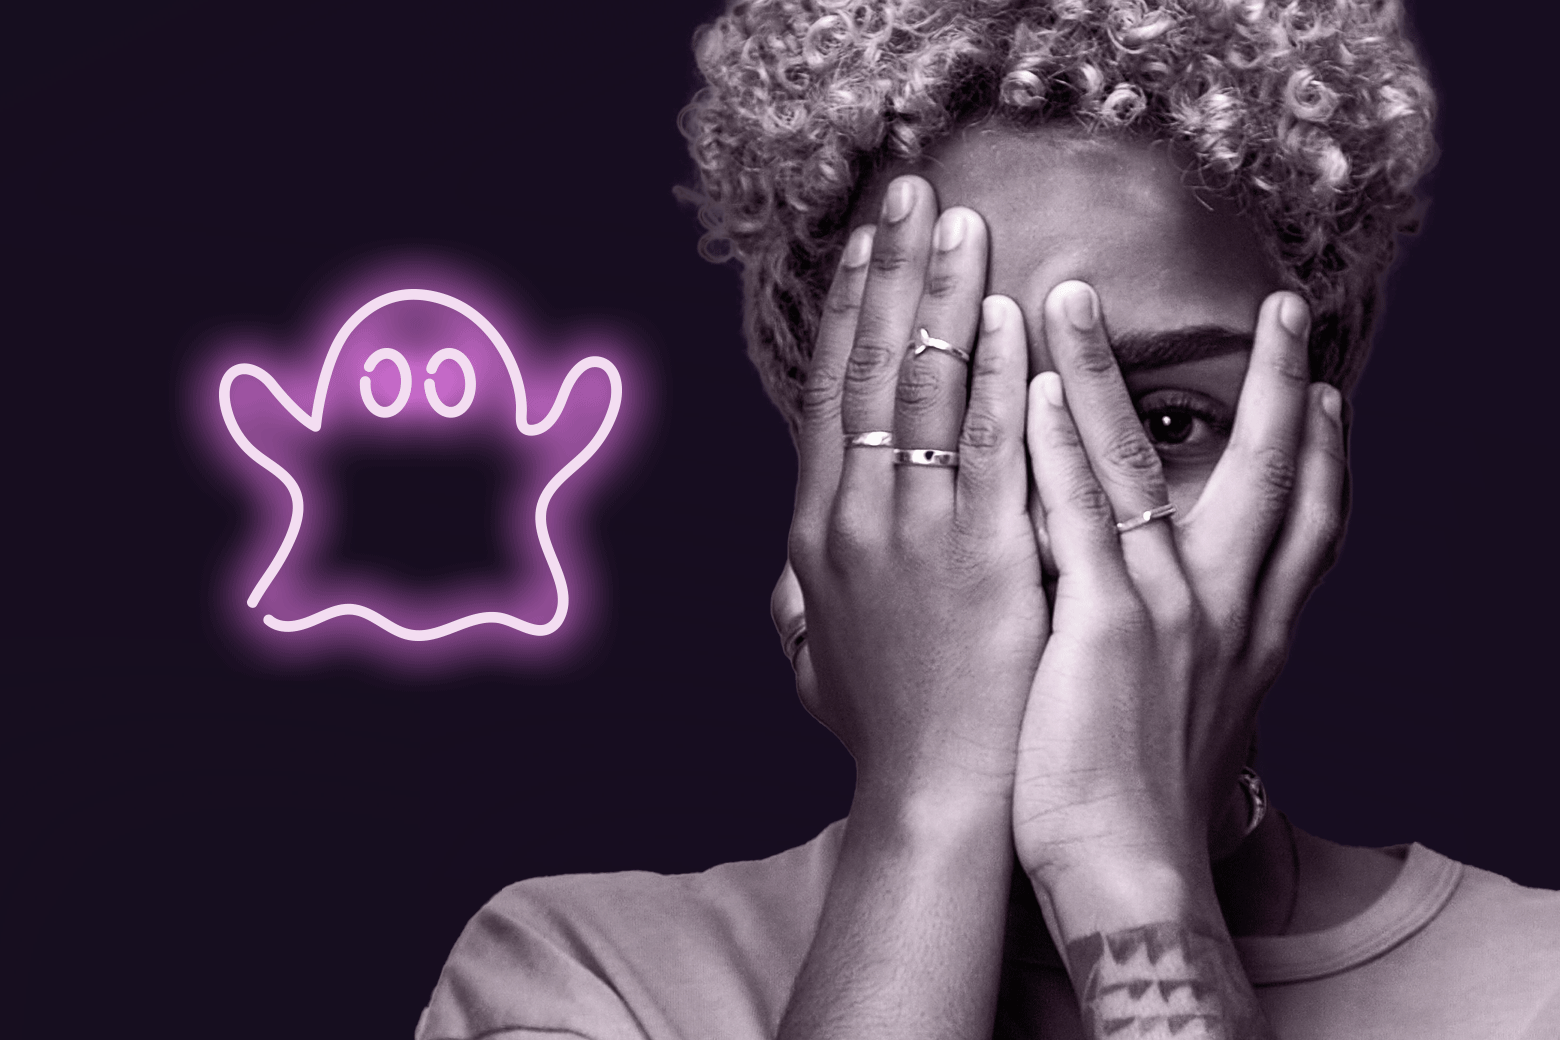 Woman peeking one eye out while covering her face with her hands, and a ghost emoji.